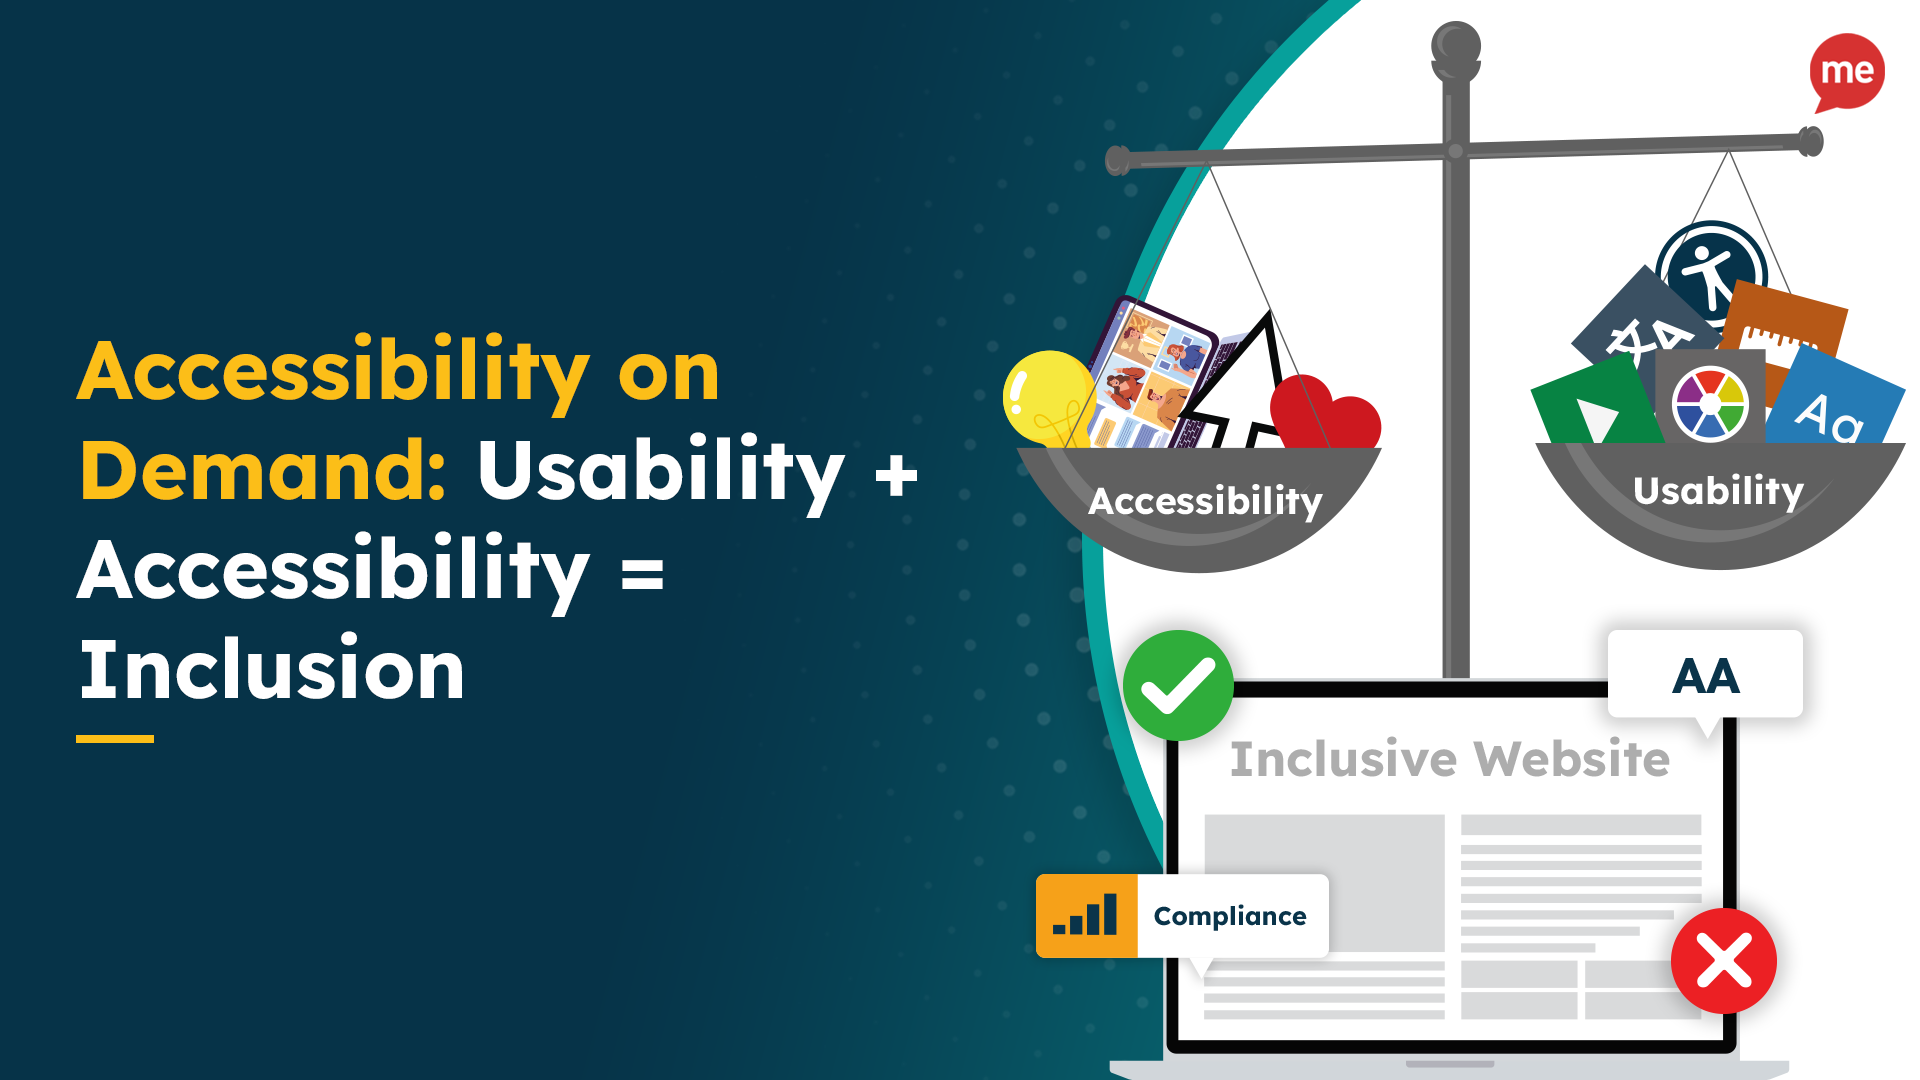 Accessibility on Demand: Usability + Accessibility = Inclusion